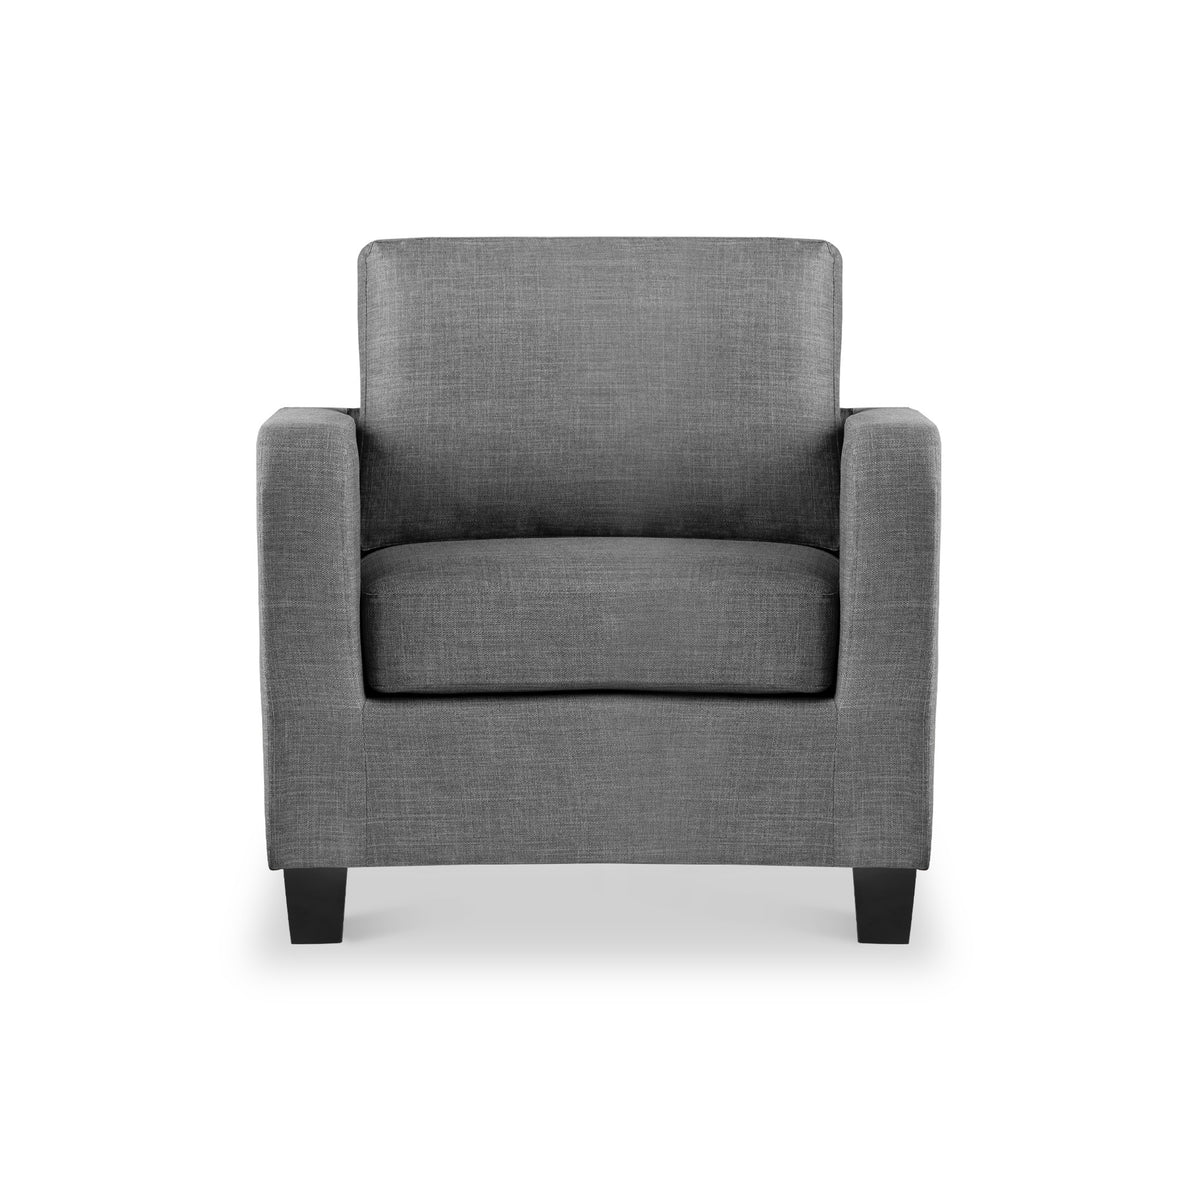 Myles Grey Fabric Armchair from Roseland Furniture